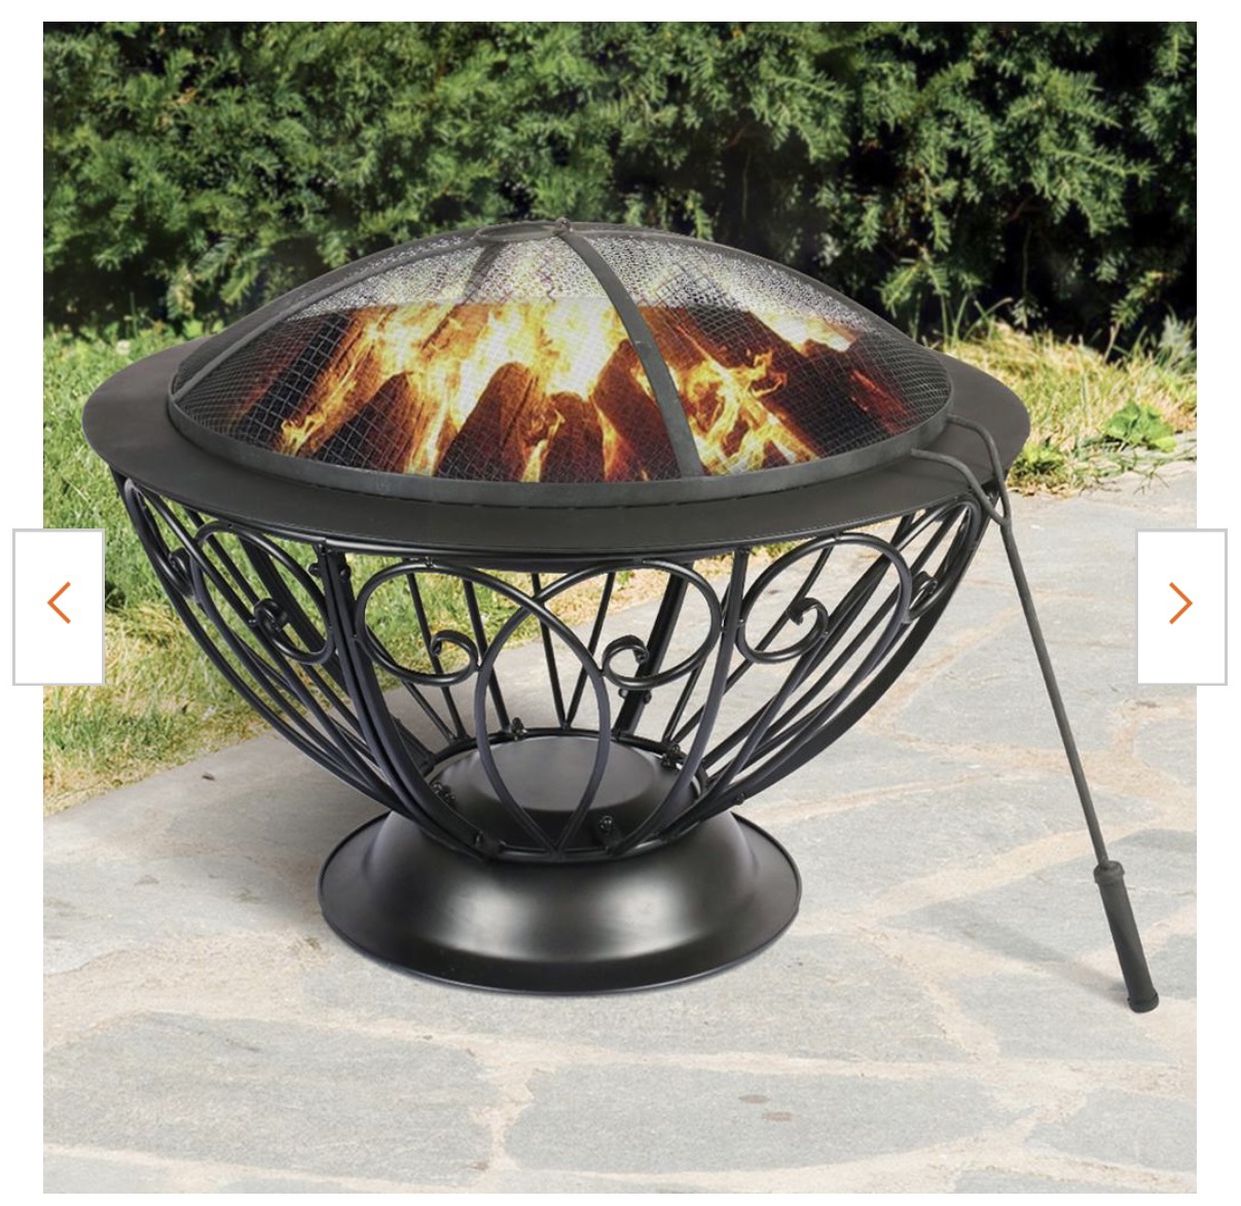 NEW！28.5 in. x 20.9 in. Round Metal Wood Burning Fire Bowl BBQ Grill Outdoor Fire Pit with Mesh Spark Screen Cover